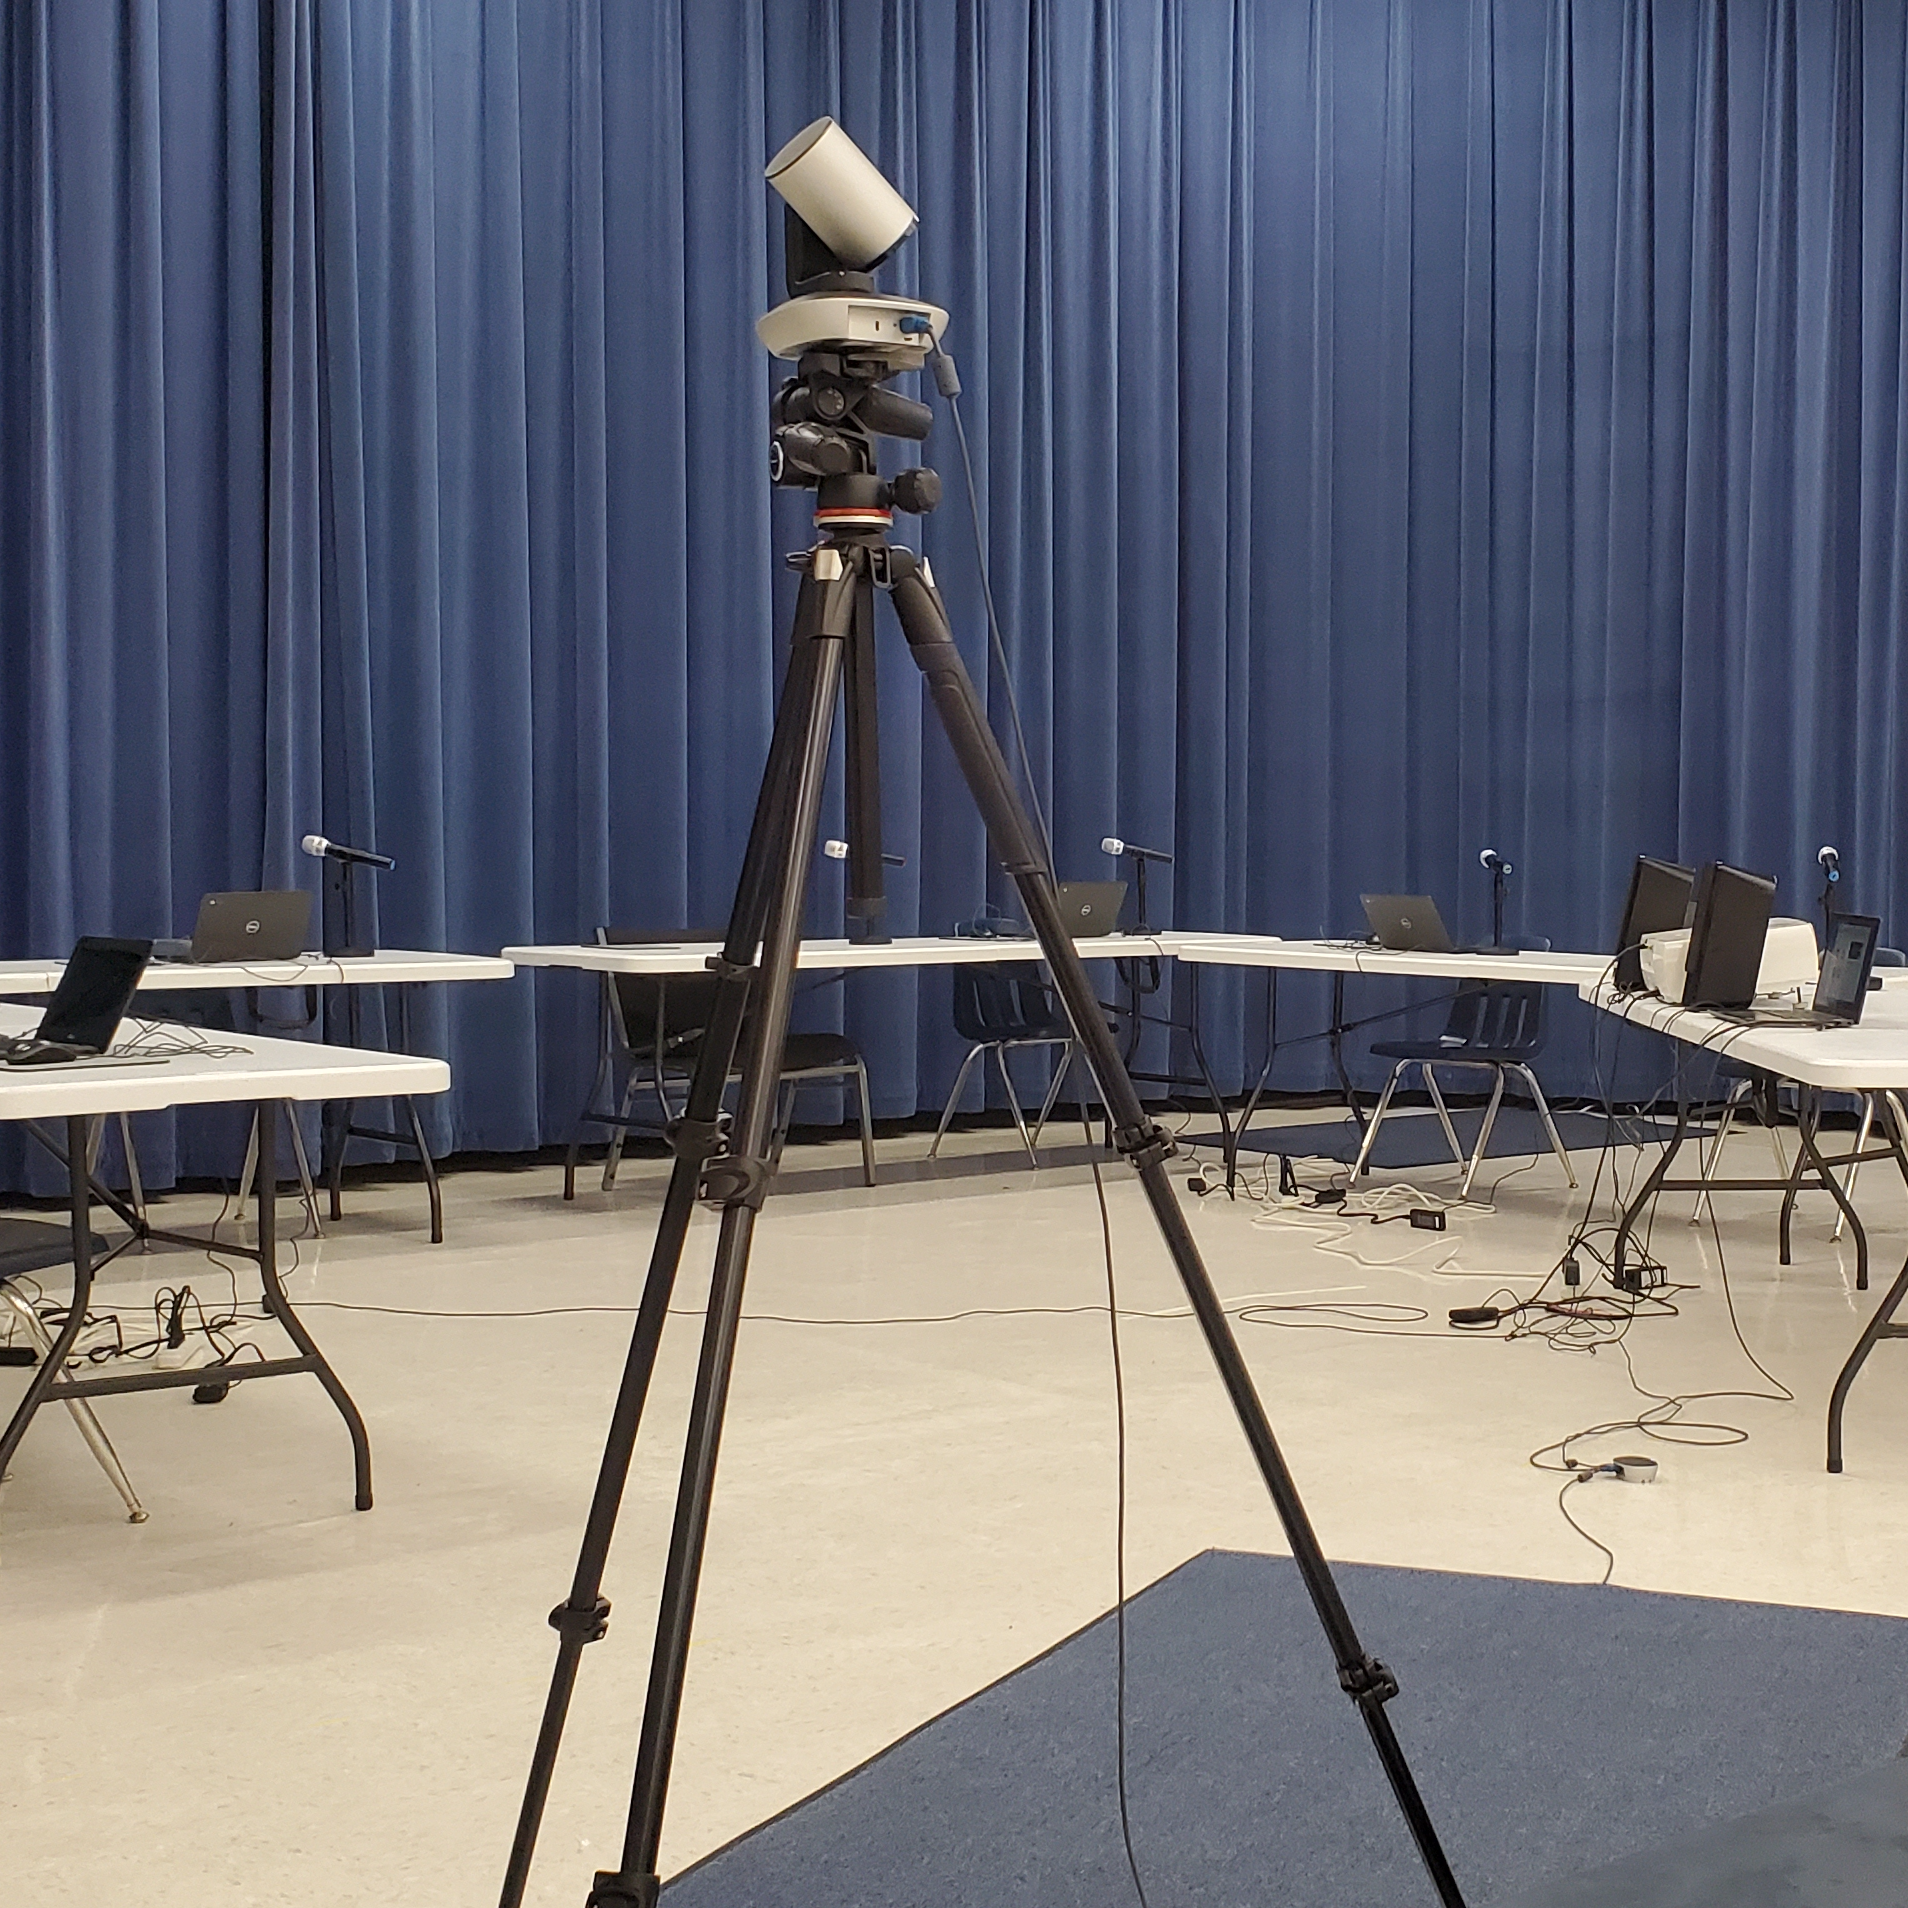 Setting up for school-board meeting at the middle school. The video camera is on a tripod in the center of the image with five viewable tables with laptops and microphones on them.